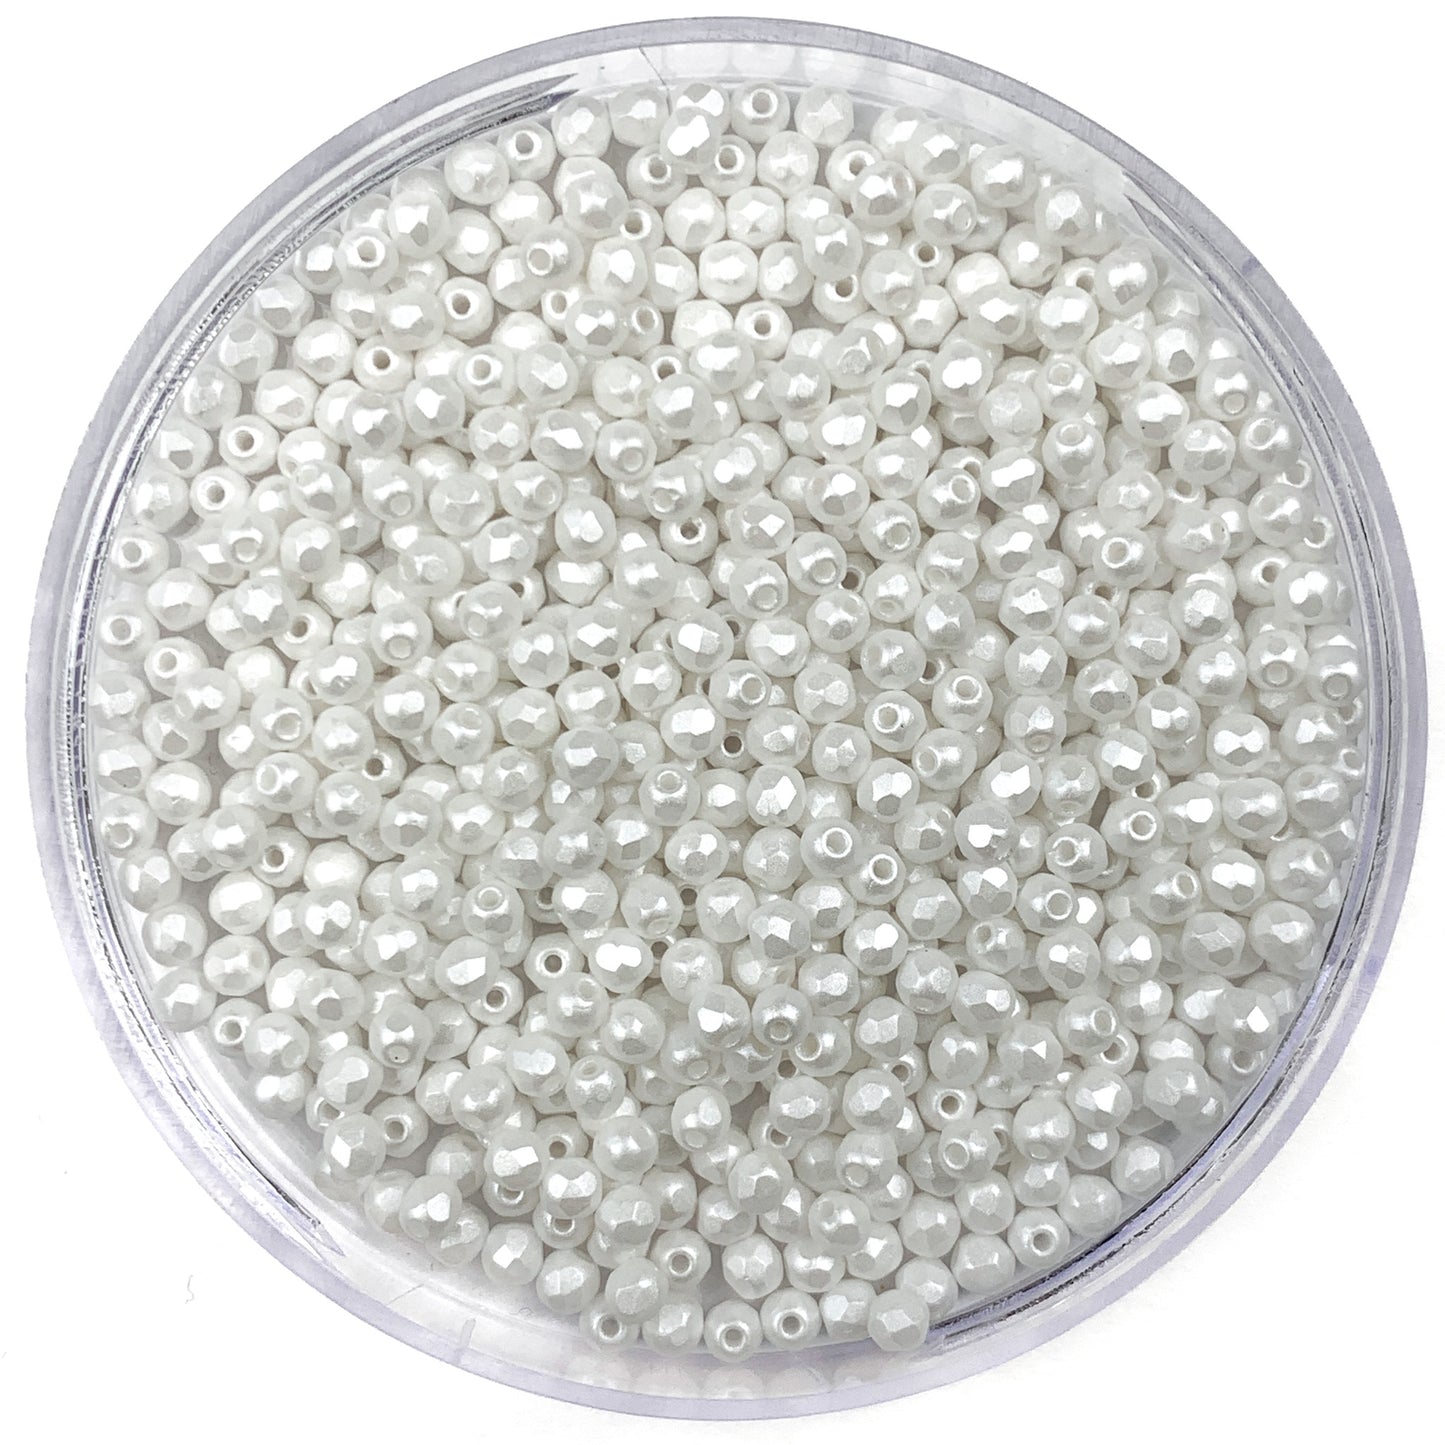 Pearl White - Czech Glass Fire Polished Beads - 3mm - FP03-337 - White